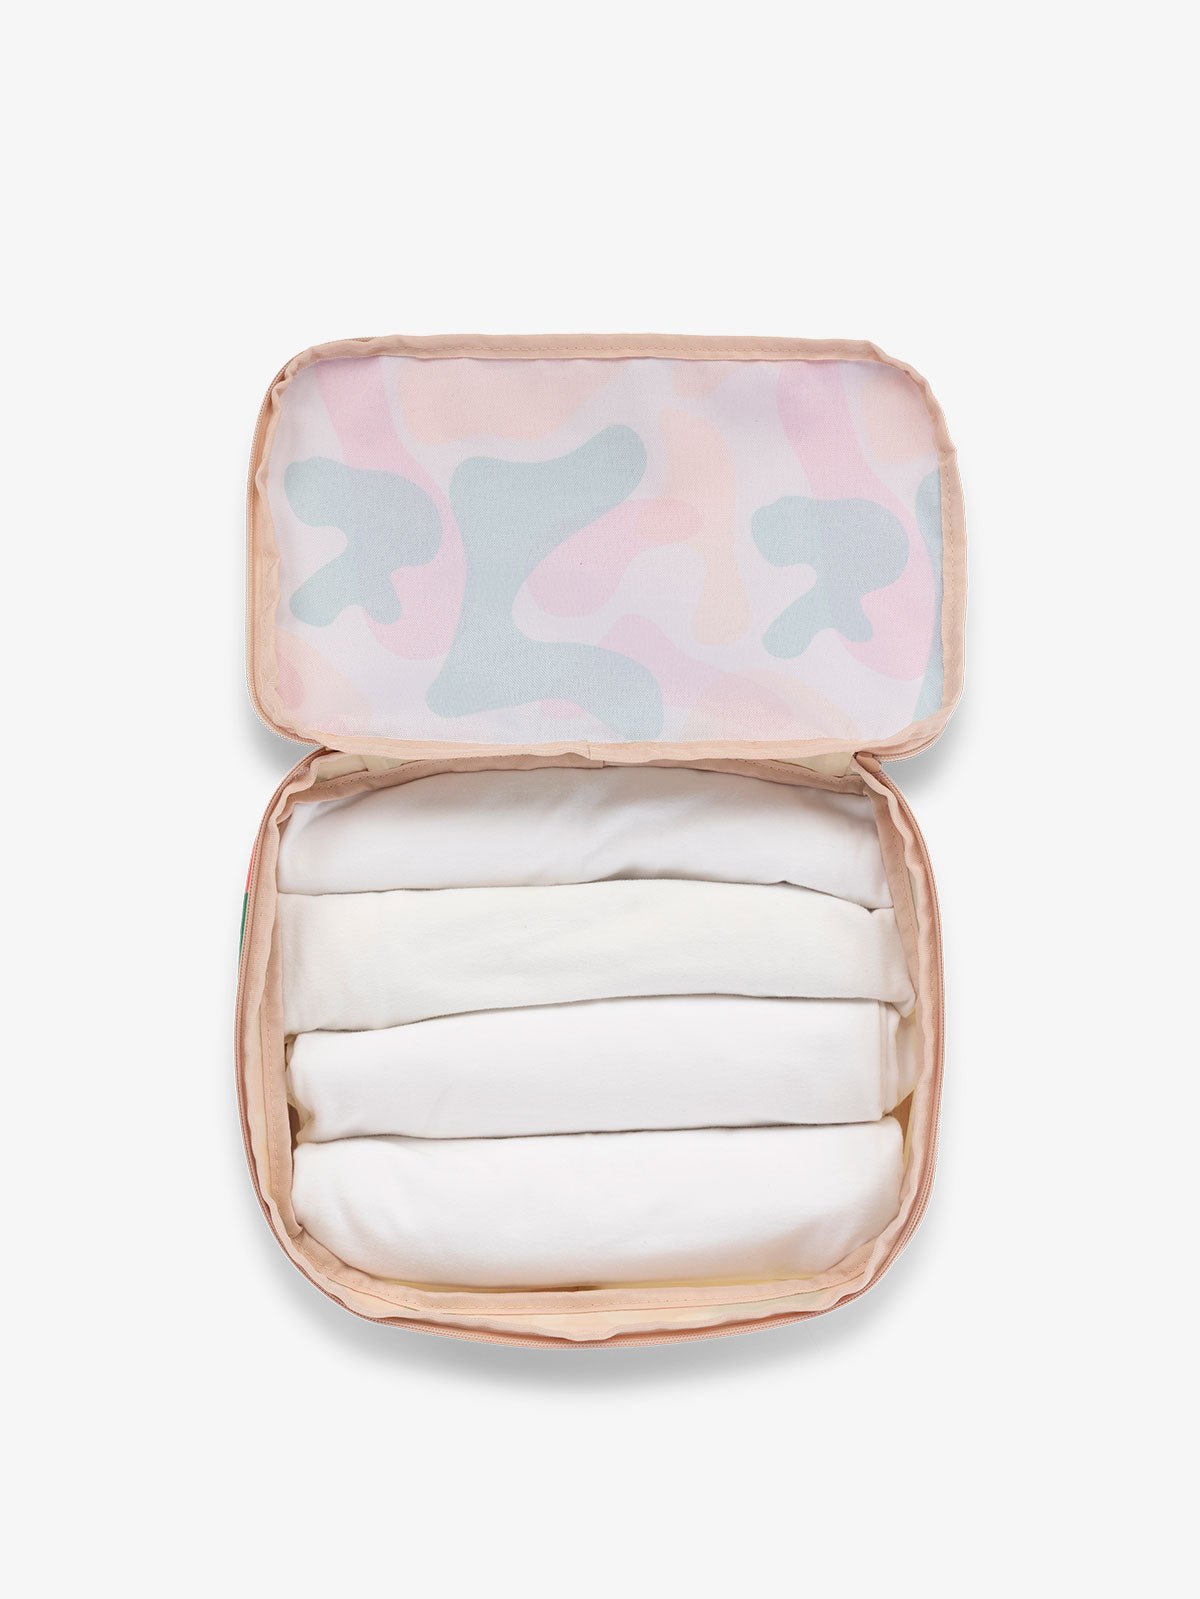 CALPAK packing cubes for travel in modern abstract